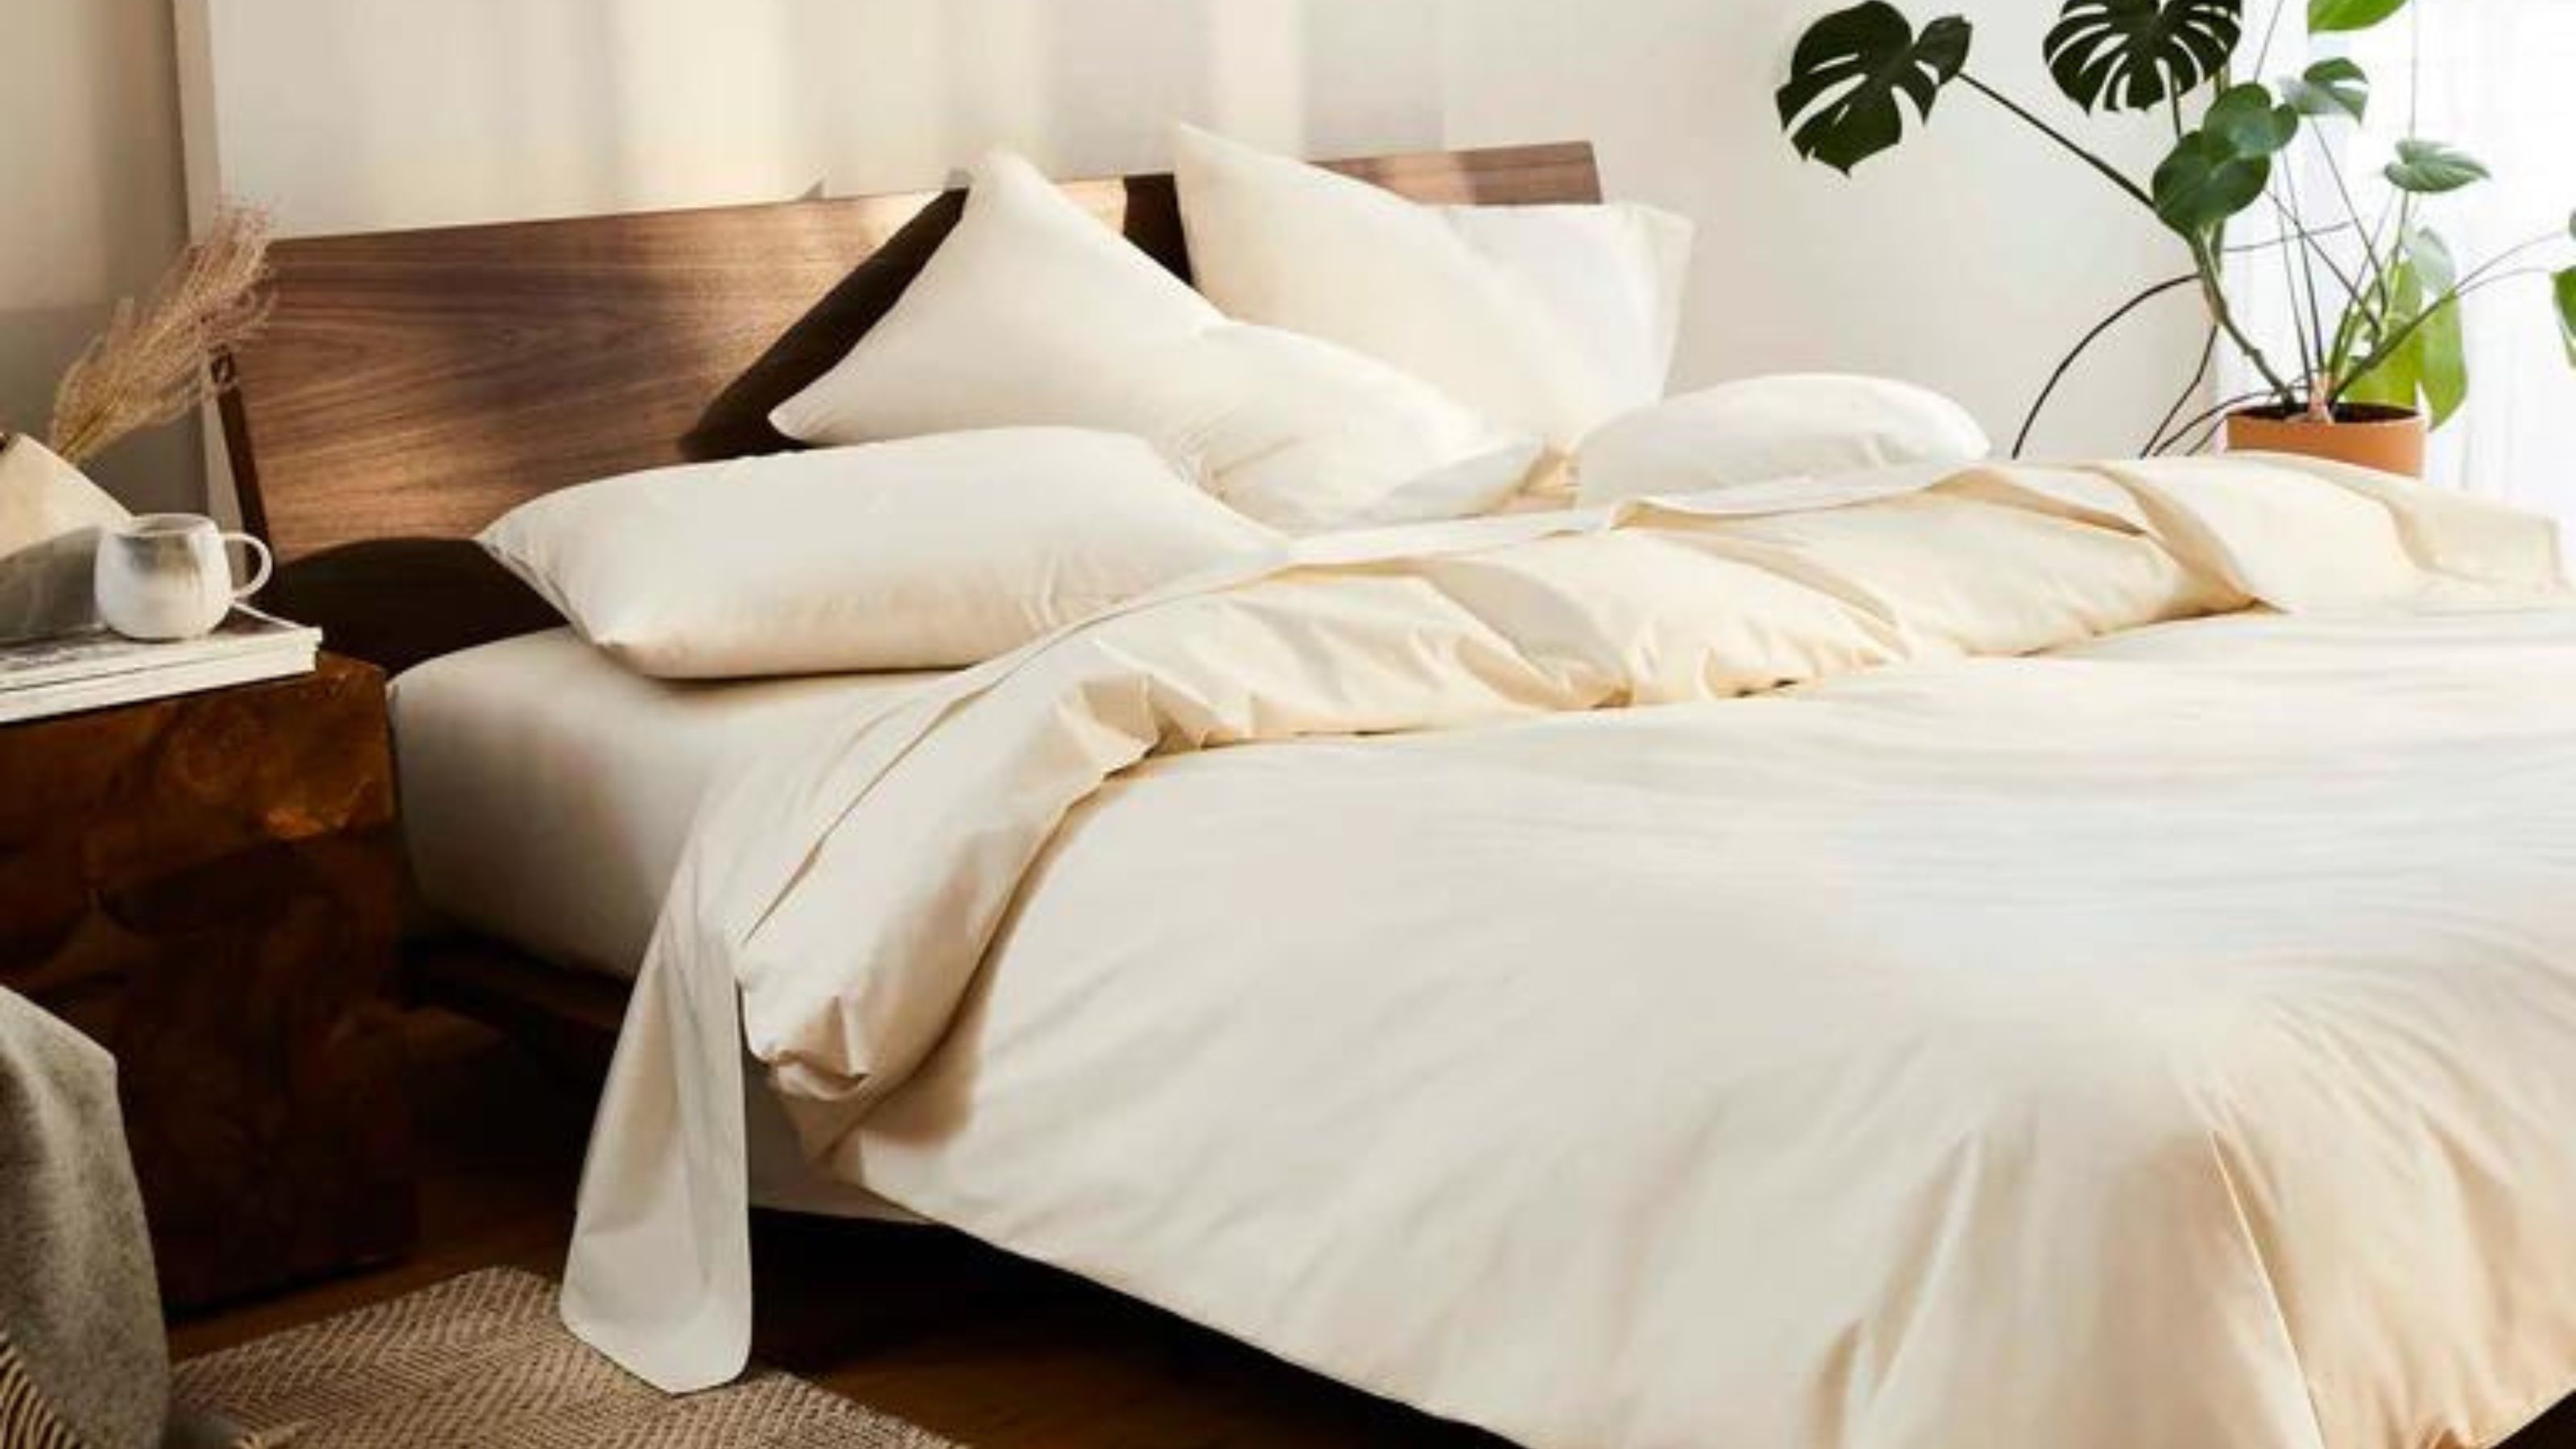 How to Buy Sheets: Expert Guide to Threadcount, Fabrics, Brands & More